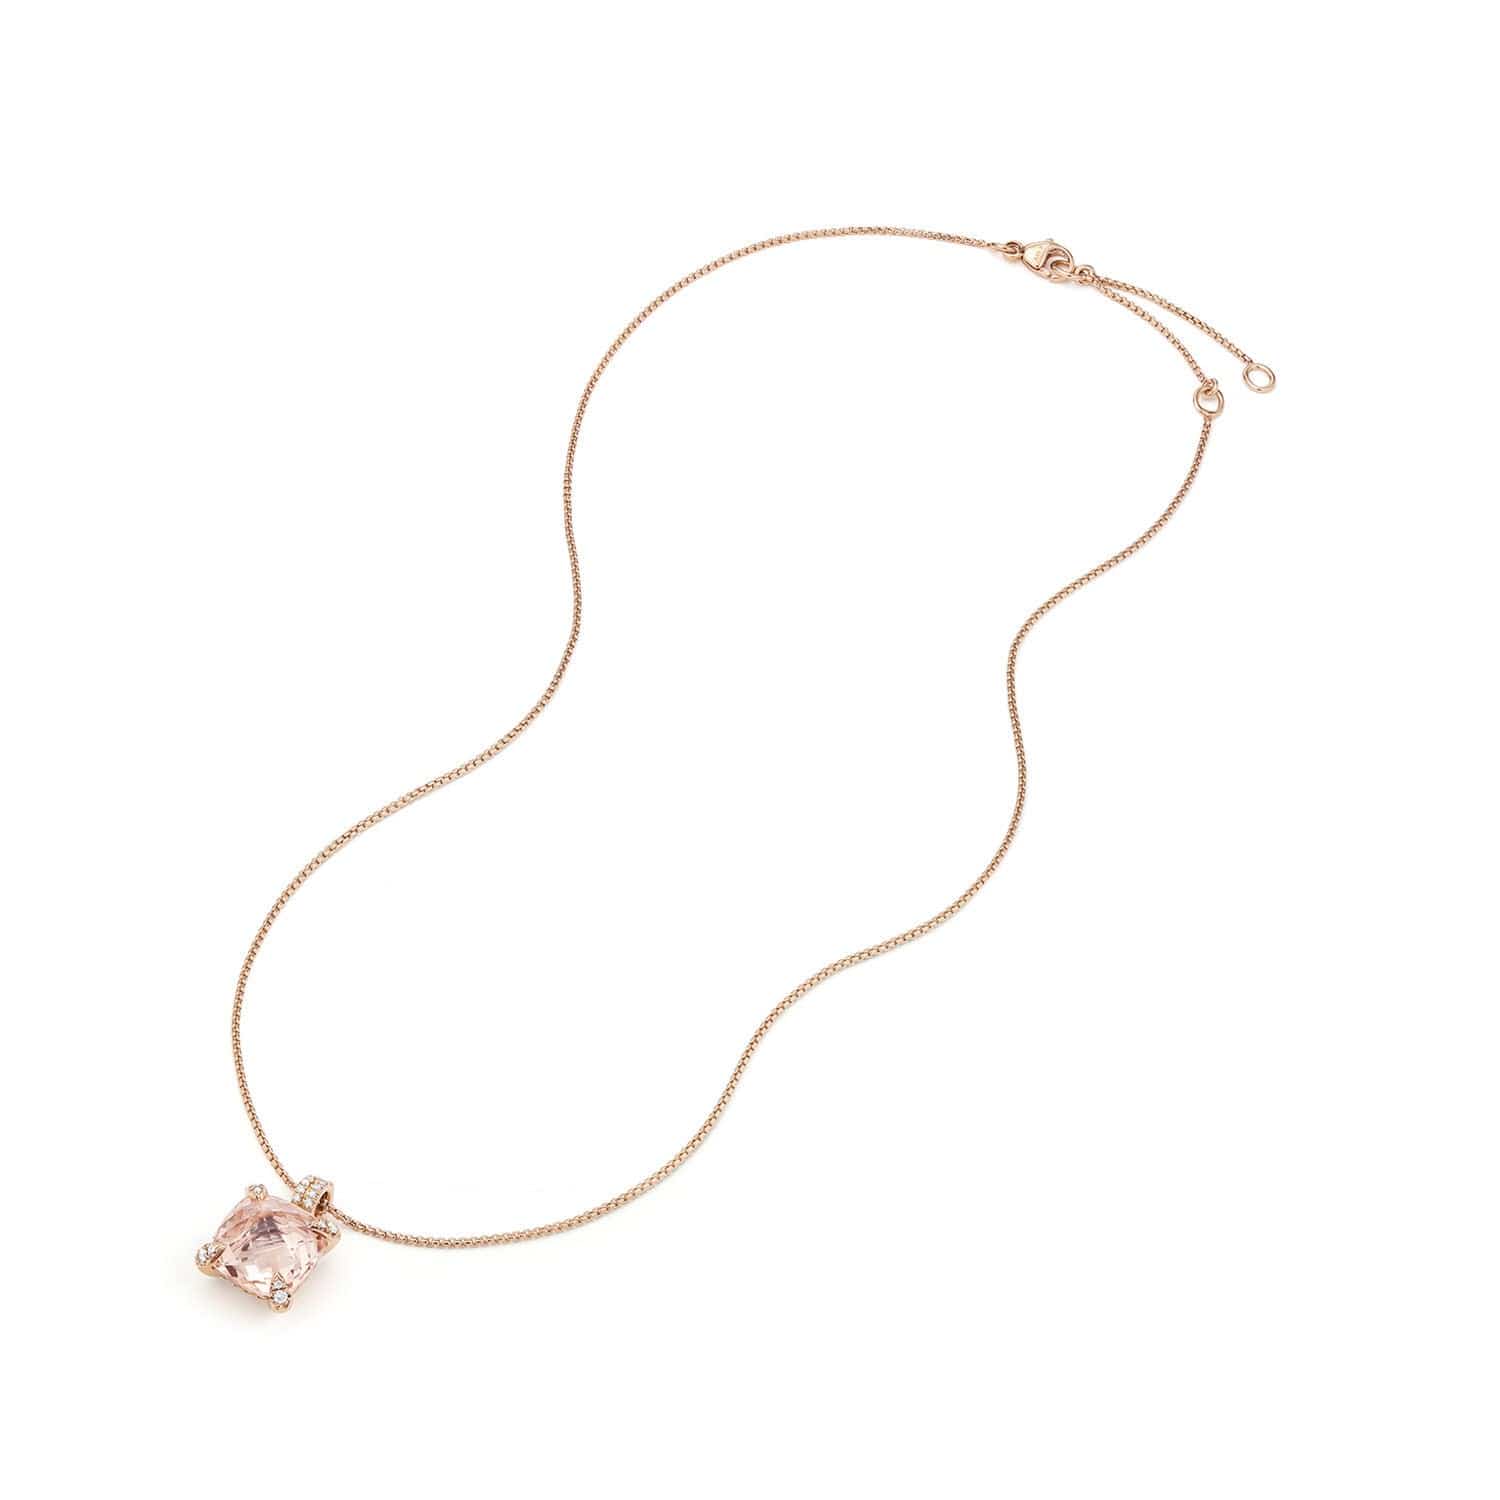 Chatelaine® Pendant Necklace with Diamonds in 18K Rose Gold, 11mm